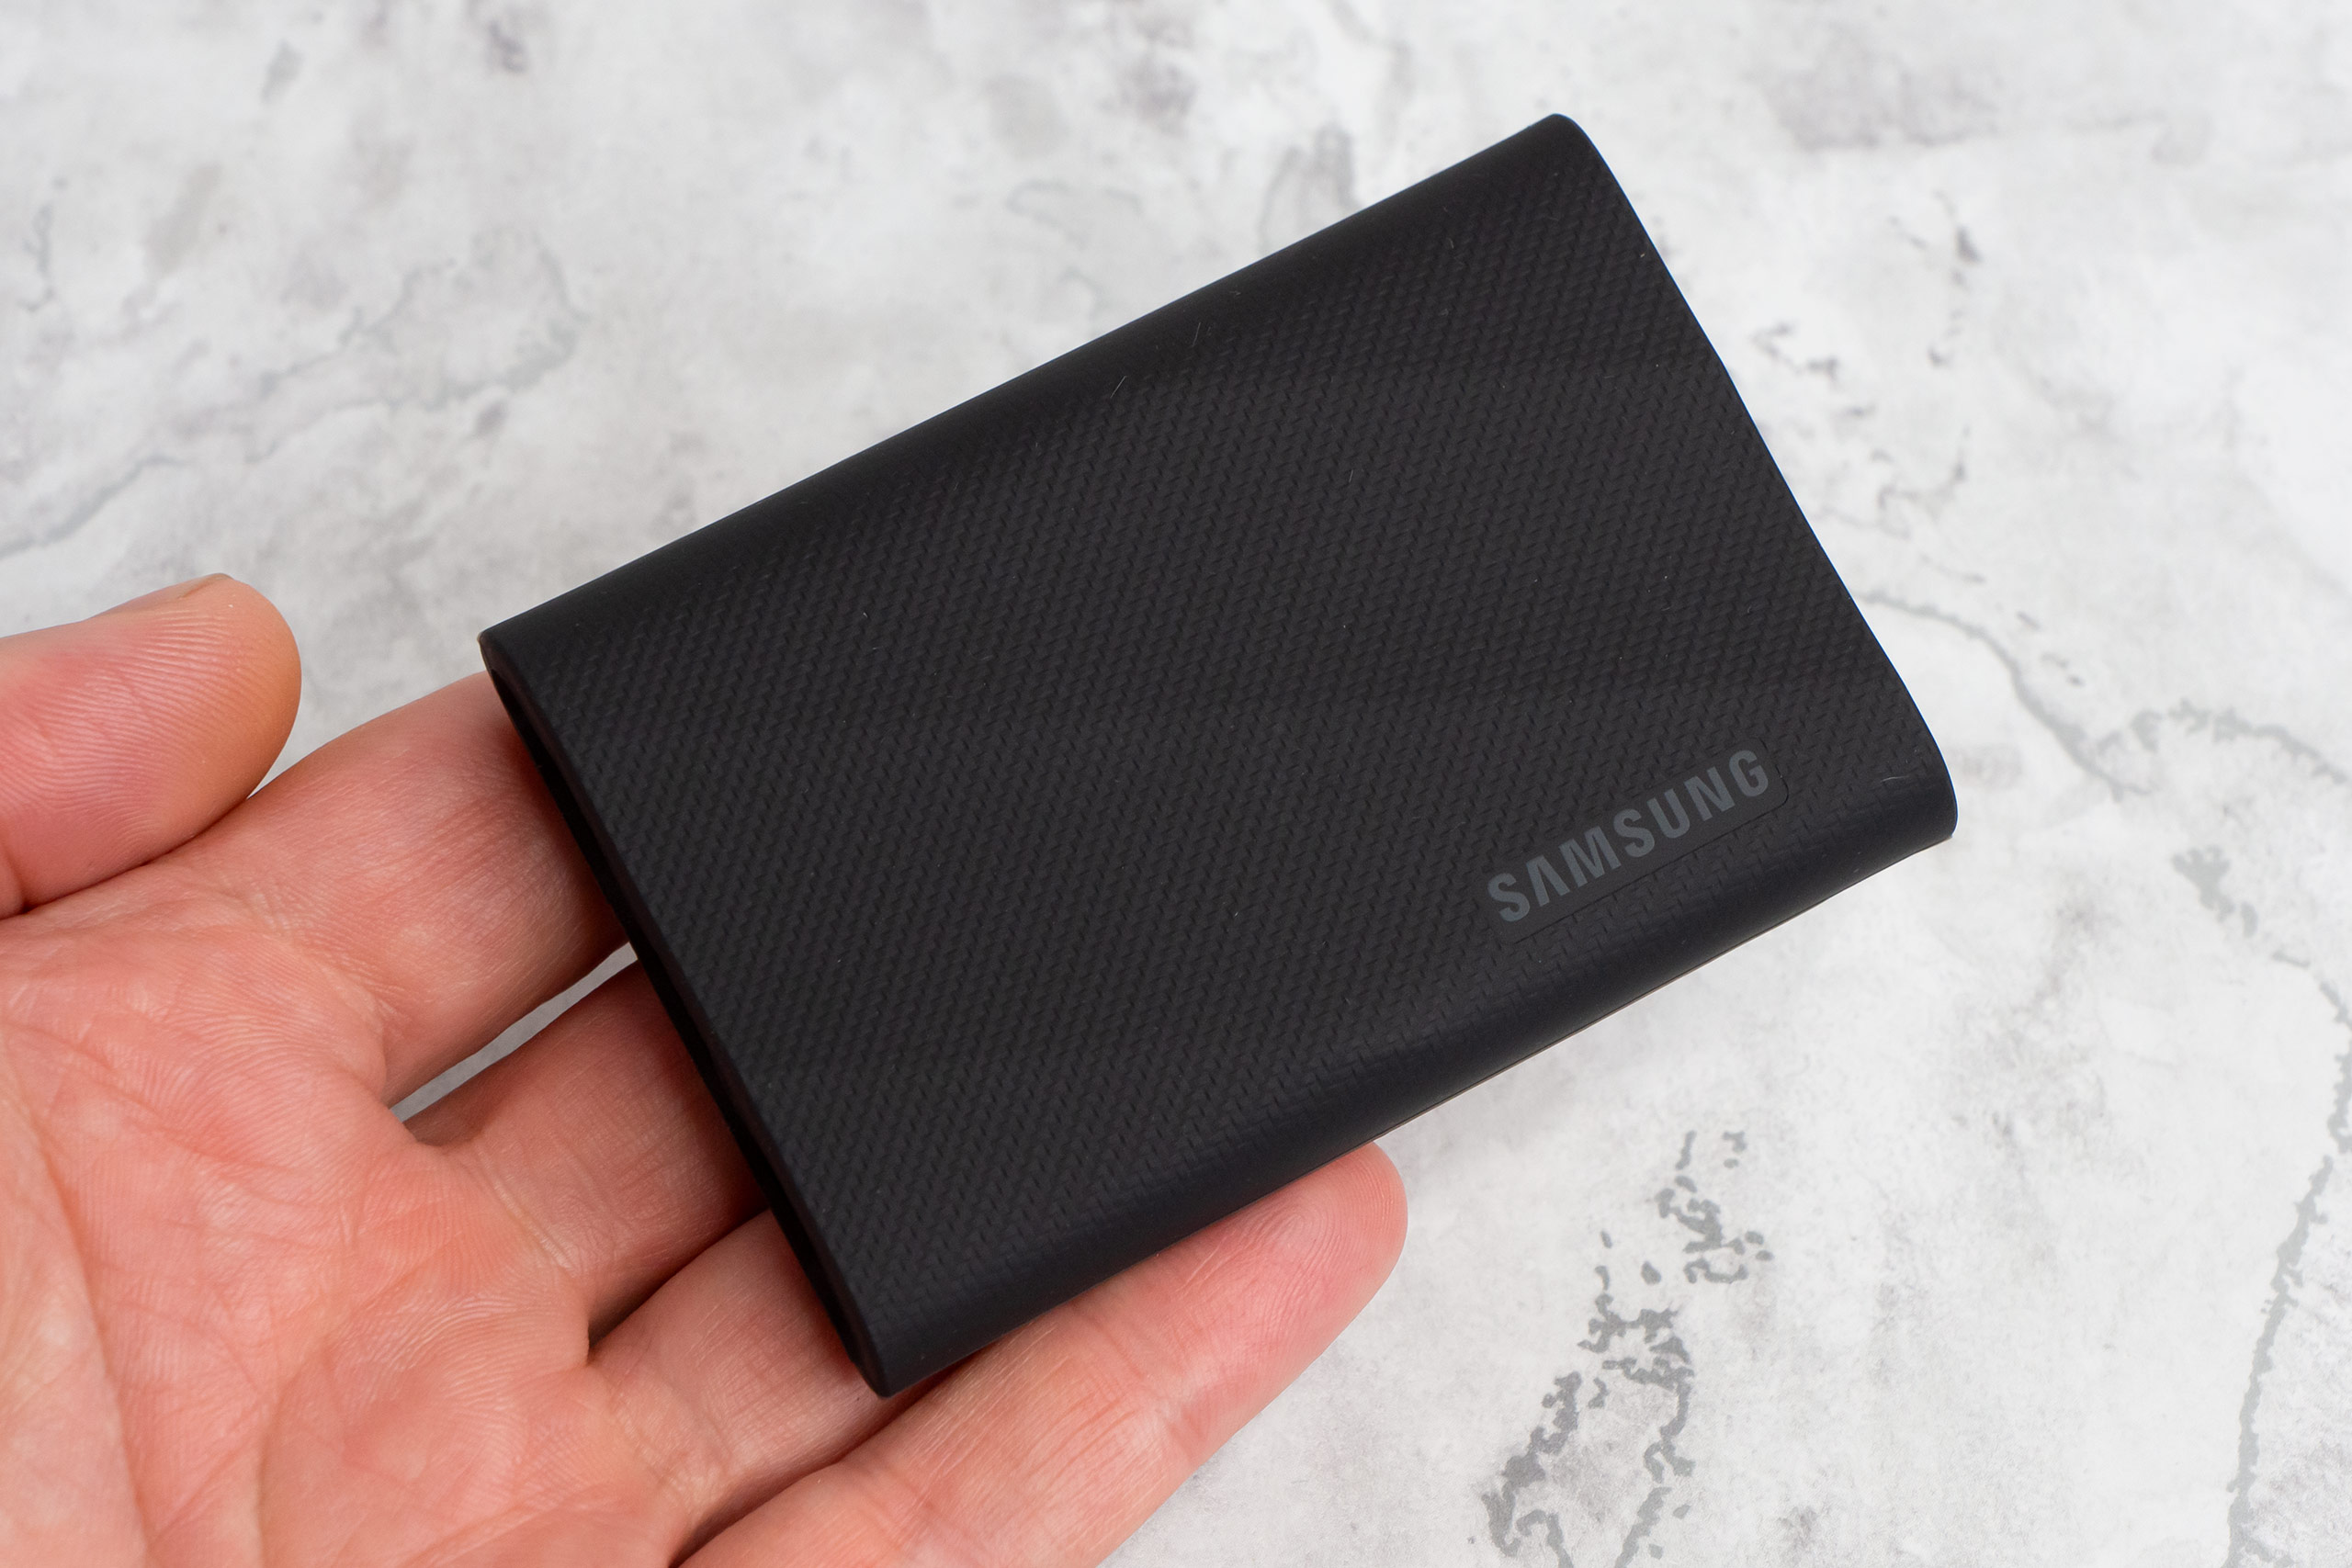 Samsung T9 SSD review: Next-generation portable storage